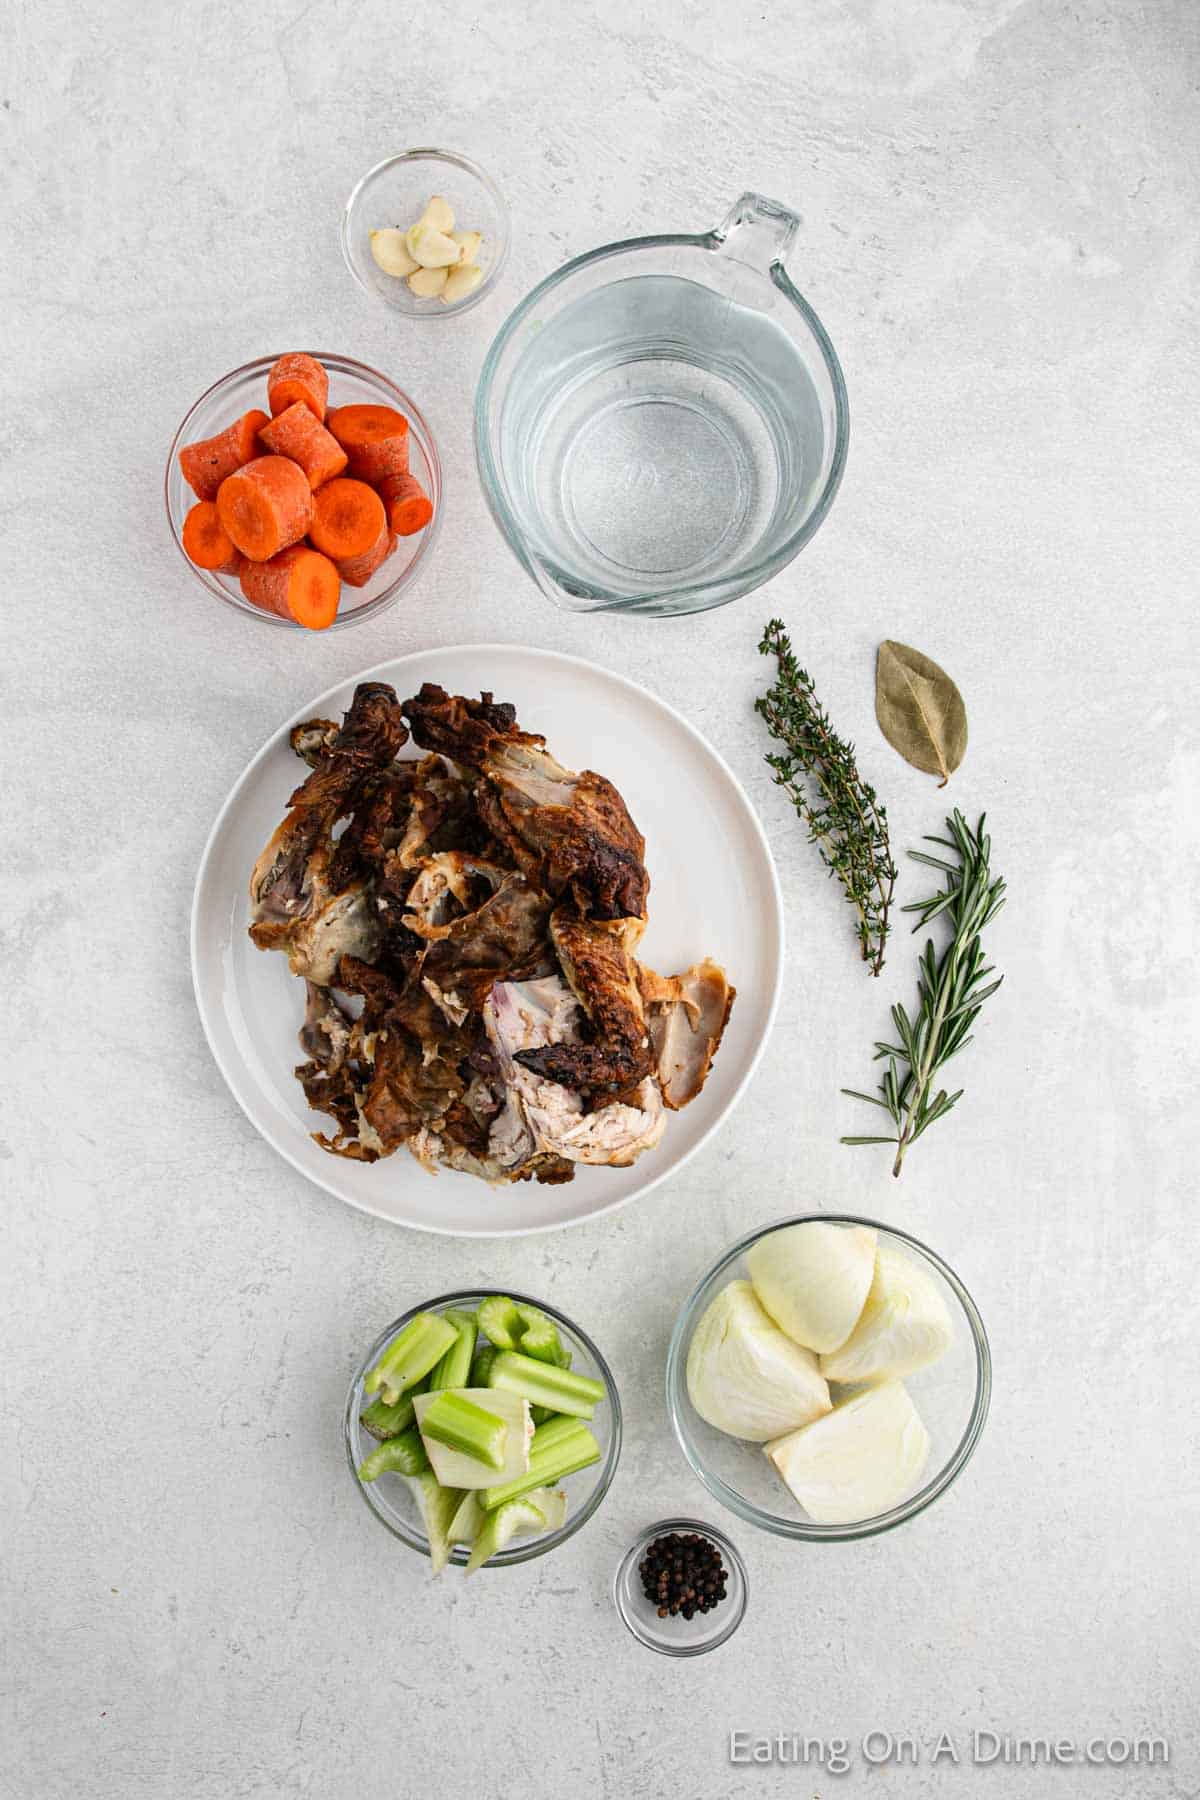 Chicken Stock Ingredients - chicken carcass, carrots, celery, onion, garlic, bay leaf, black peppercorns, thyme, rosemary, water